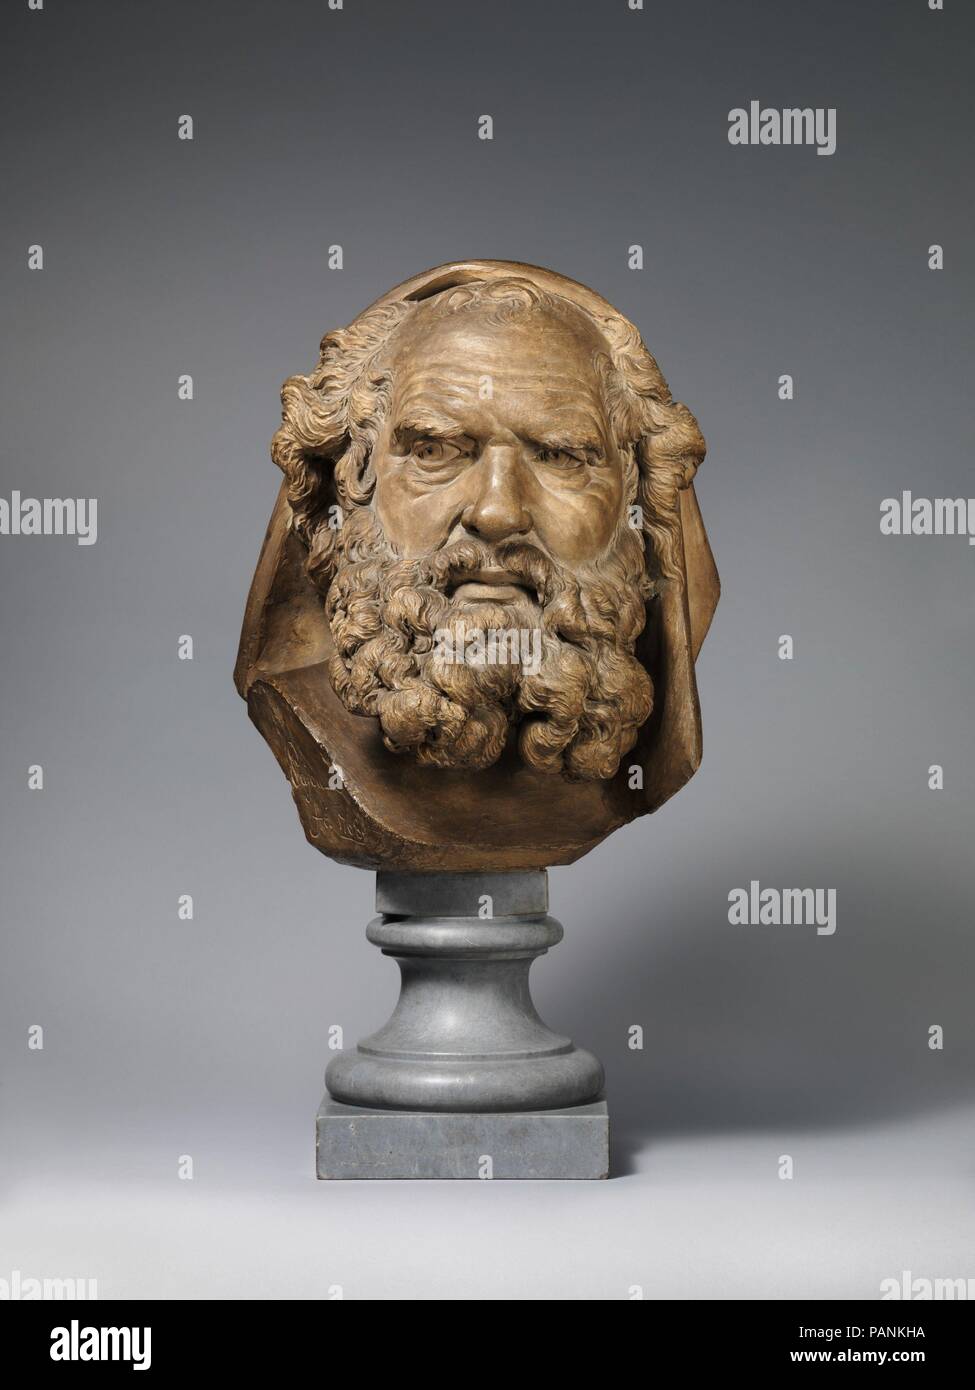 Head of a Bearded Elder. Artist: Augustin Pajou (French, Paris 1730-1809 Paris). Culture: French, probably Paris. Dimensions: Overall, without socle (confirmed): 14 1/4 x 12 1/8 x 9 1/2 in. (36.2 x 30.8 x 24.1 cm);  Height with socle: 21 1/2 in. (54.6 cm). Date: 1768.  The precise meaning of this bristling elder remains to be determined. Suggestions for his identity have ranged from Aristotle to Moses to a retired pugilist. The work fits within the French academic tradition of modeling heads to express various passions, but which could this belligerent character personify? Barely controlled ra Stock Photo